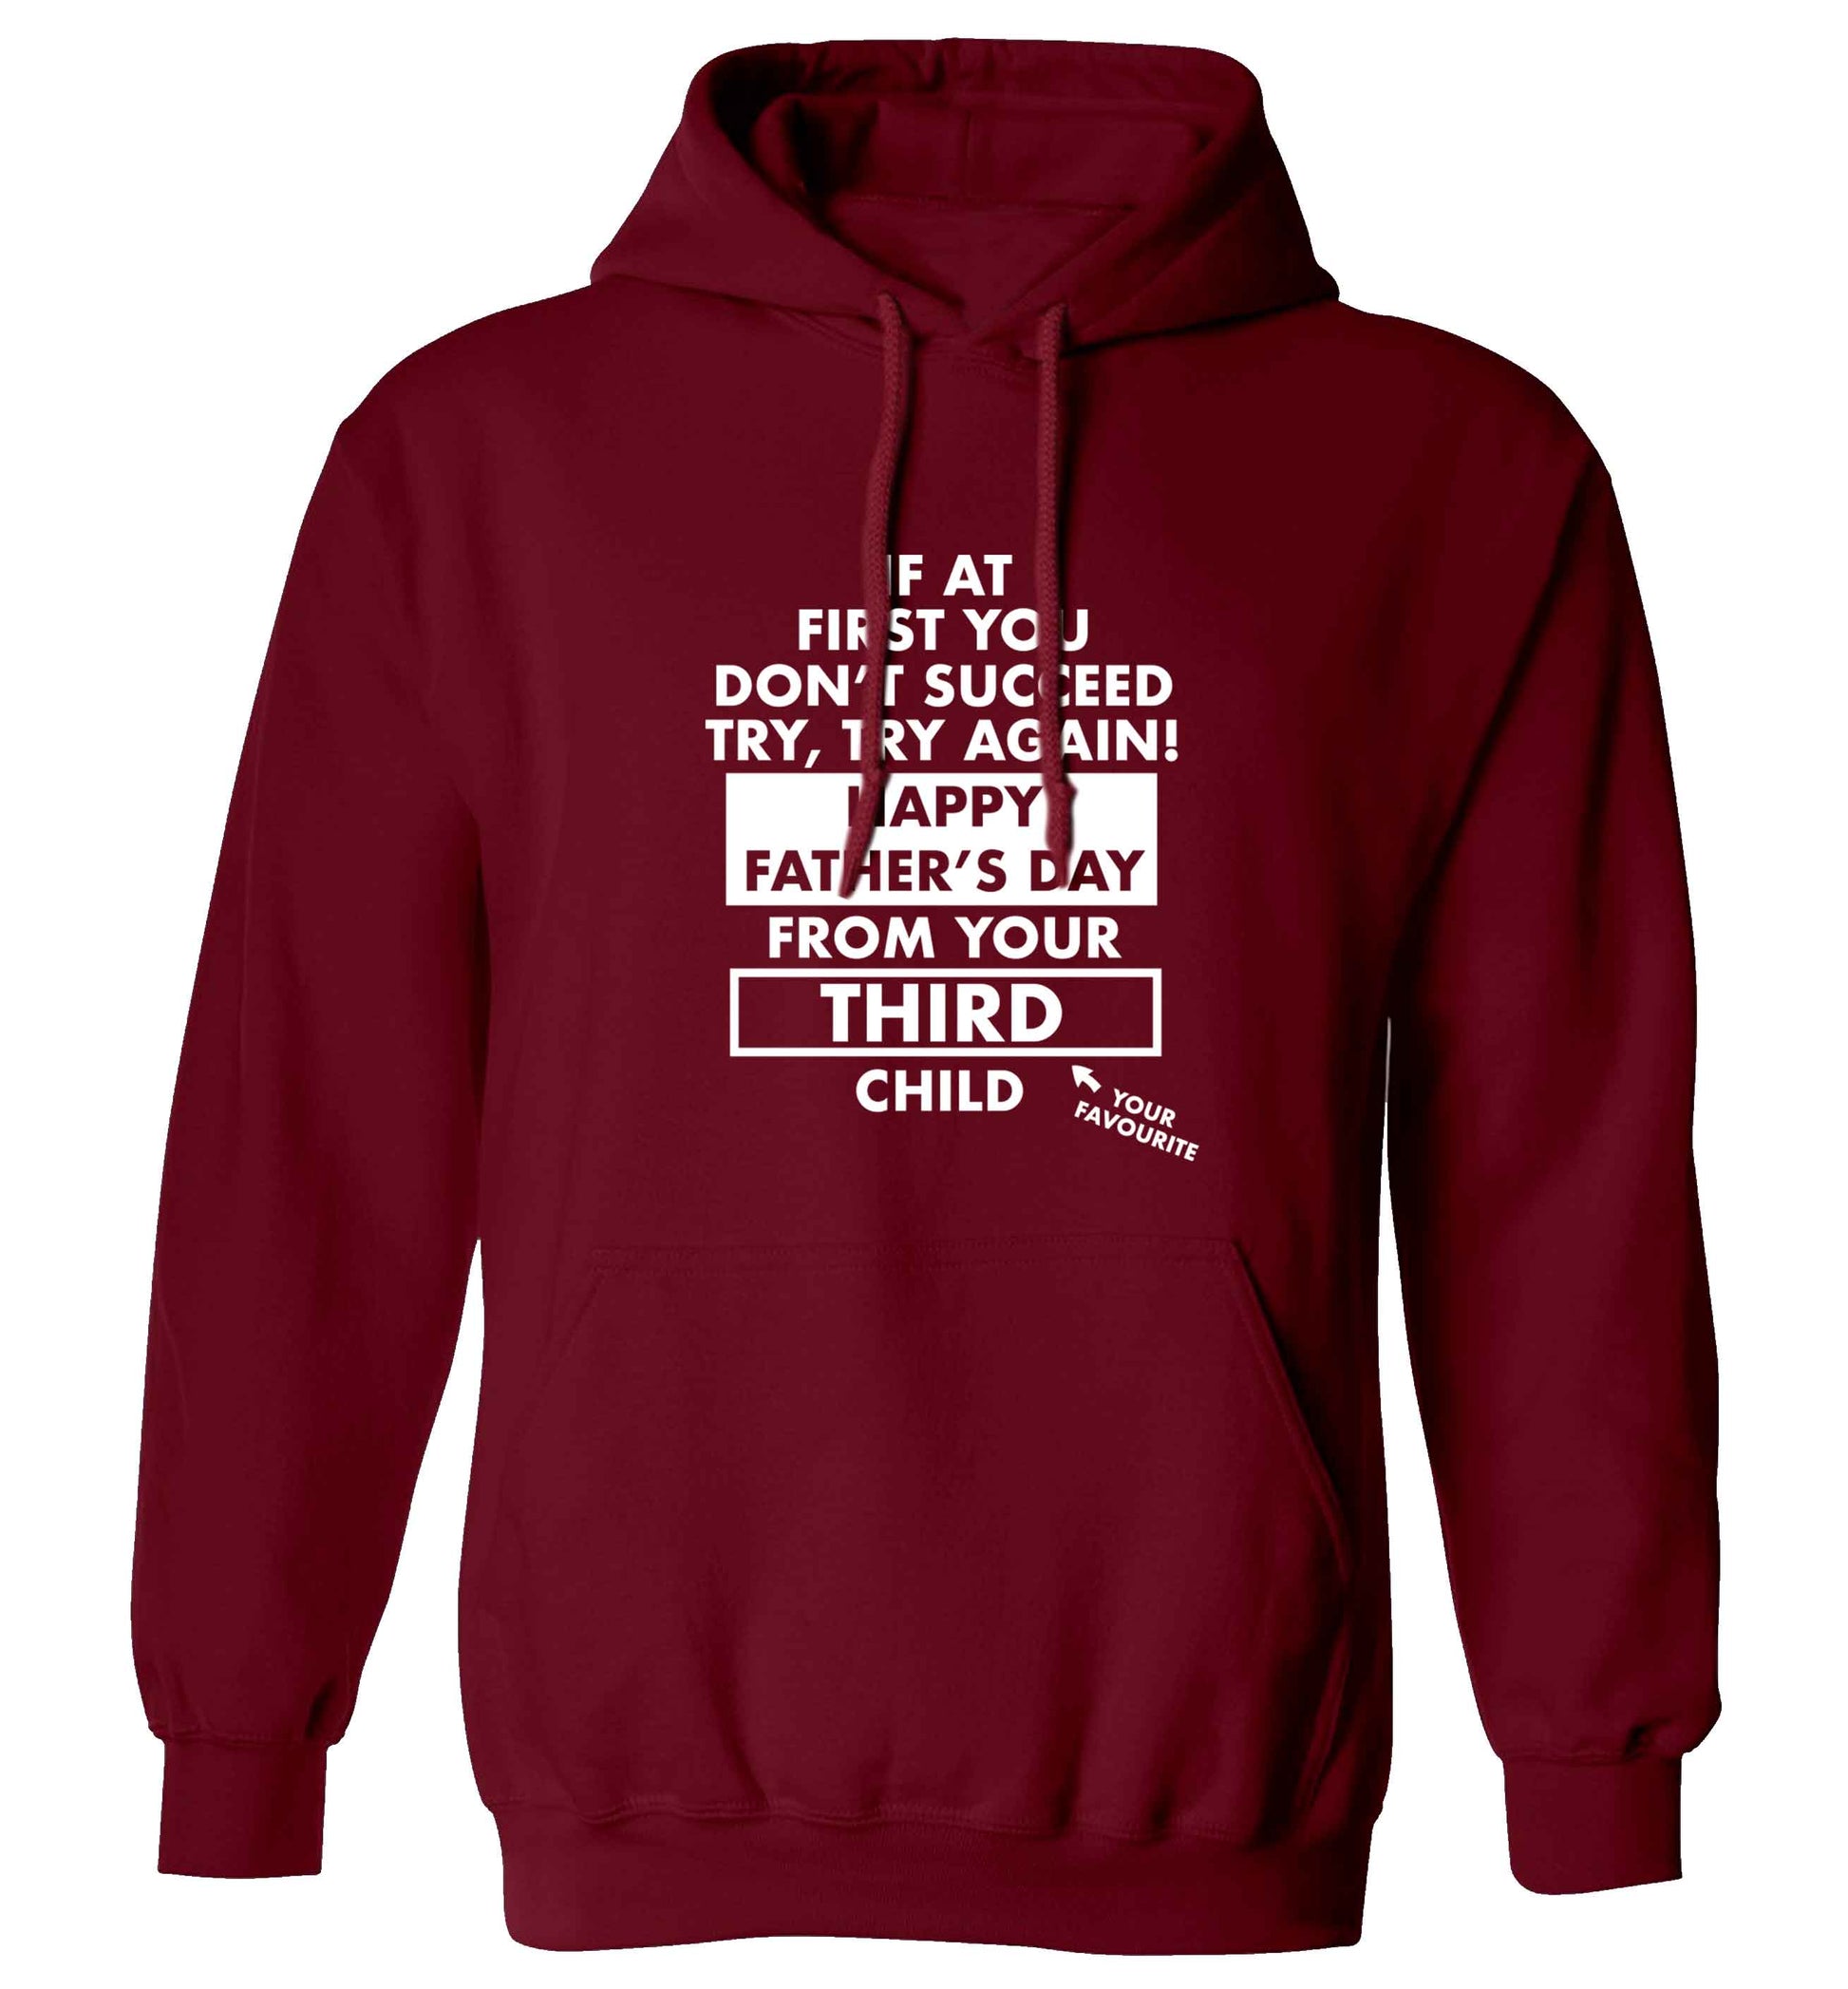 If at first you don't succeed try, try again Happy Father's day from your third child! adults unisex maroon hoodie 2XL